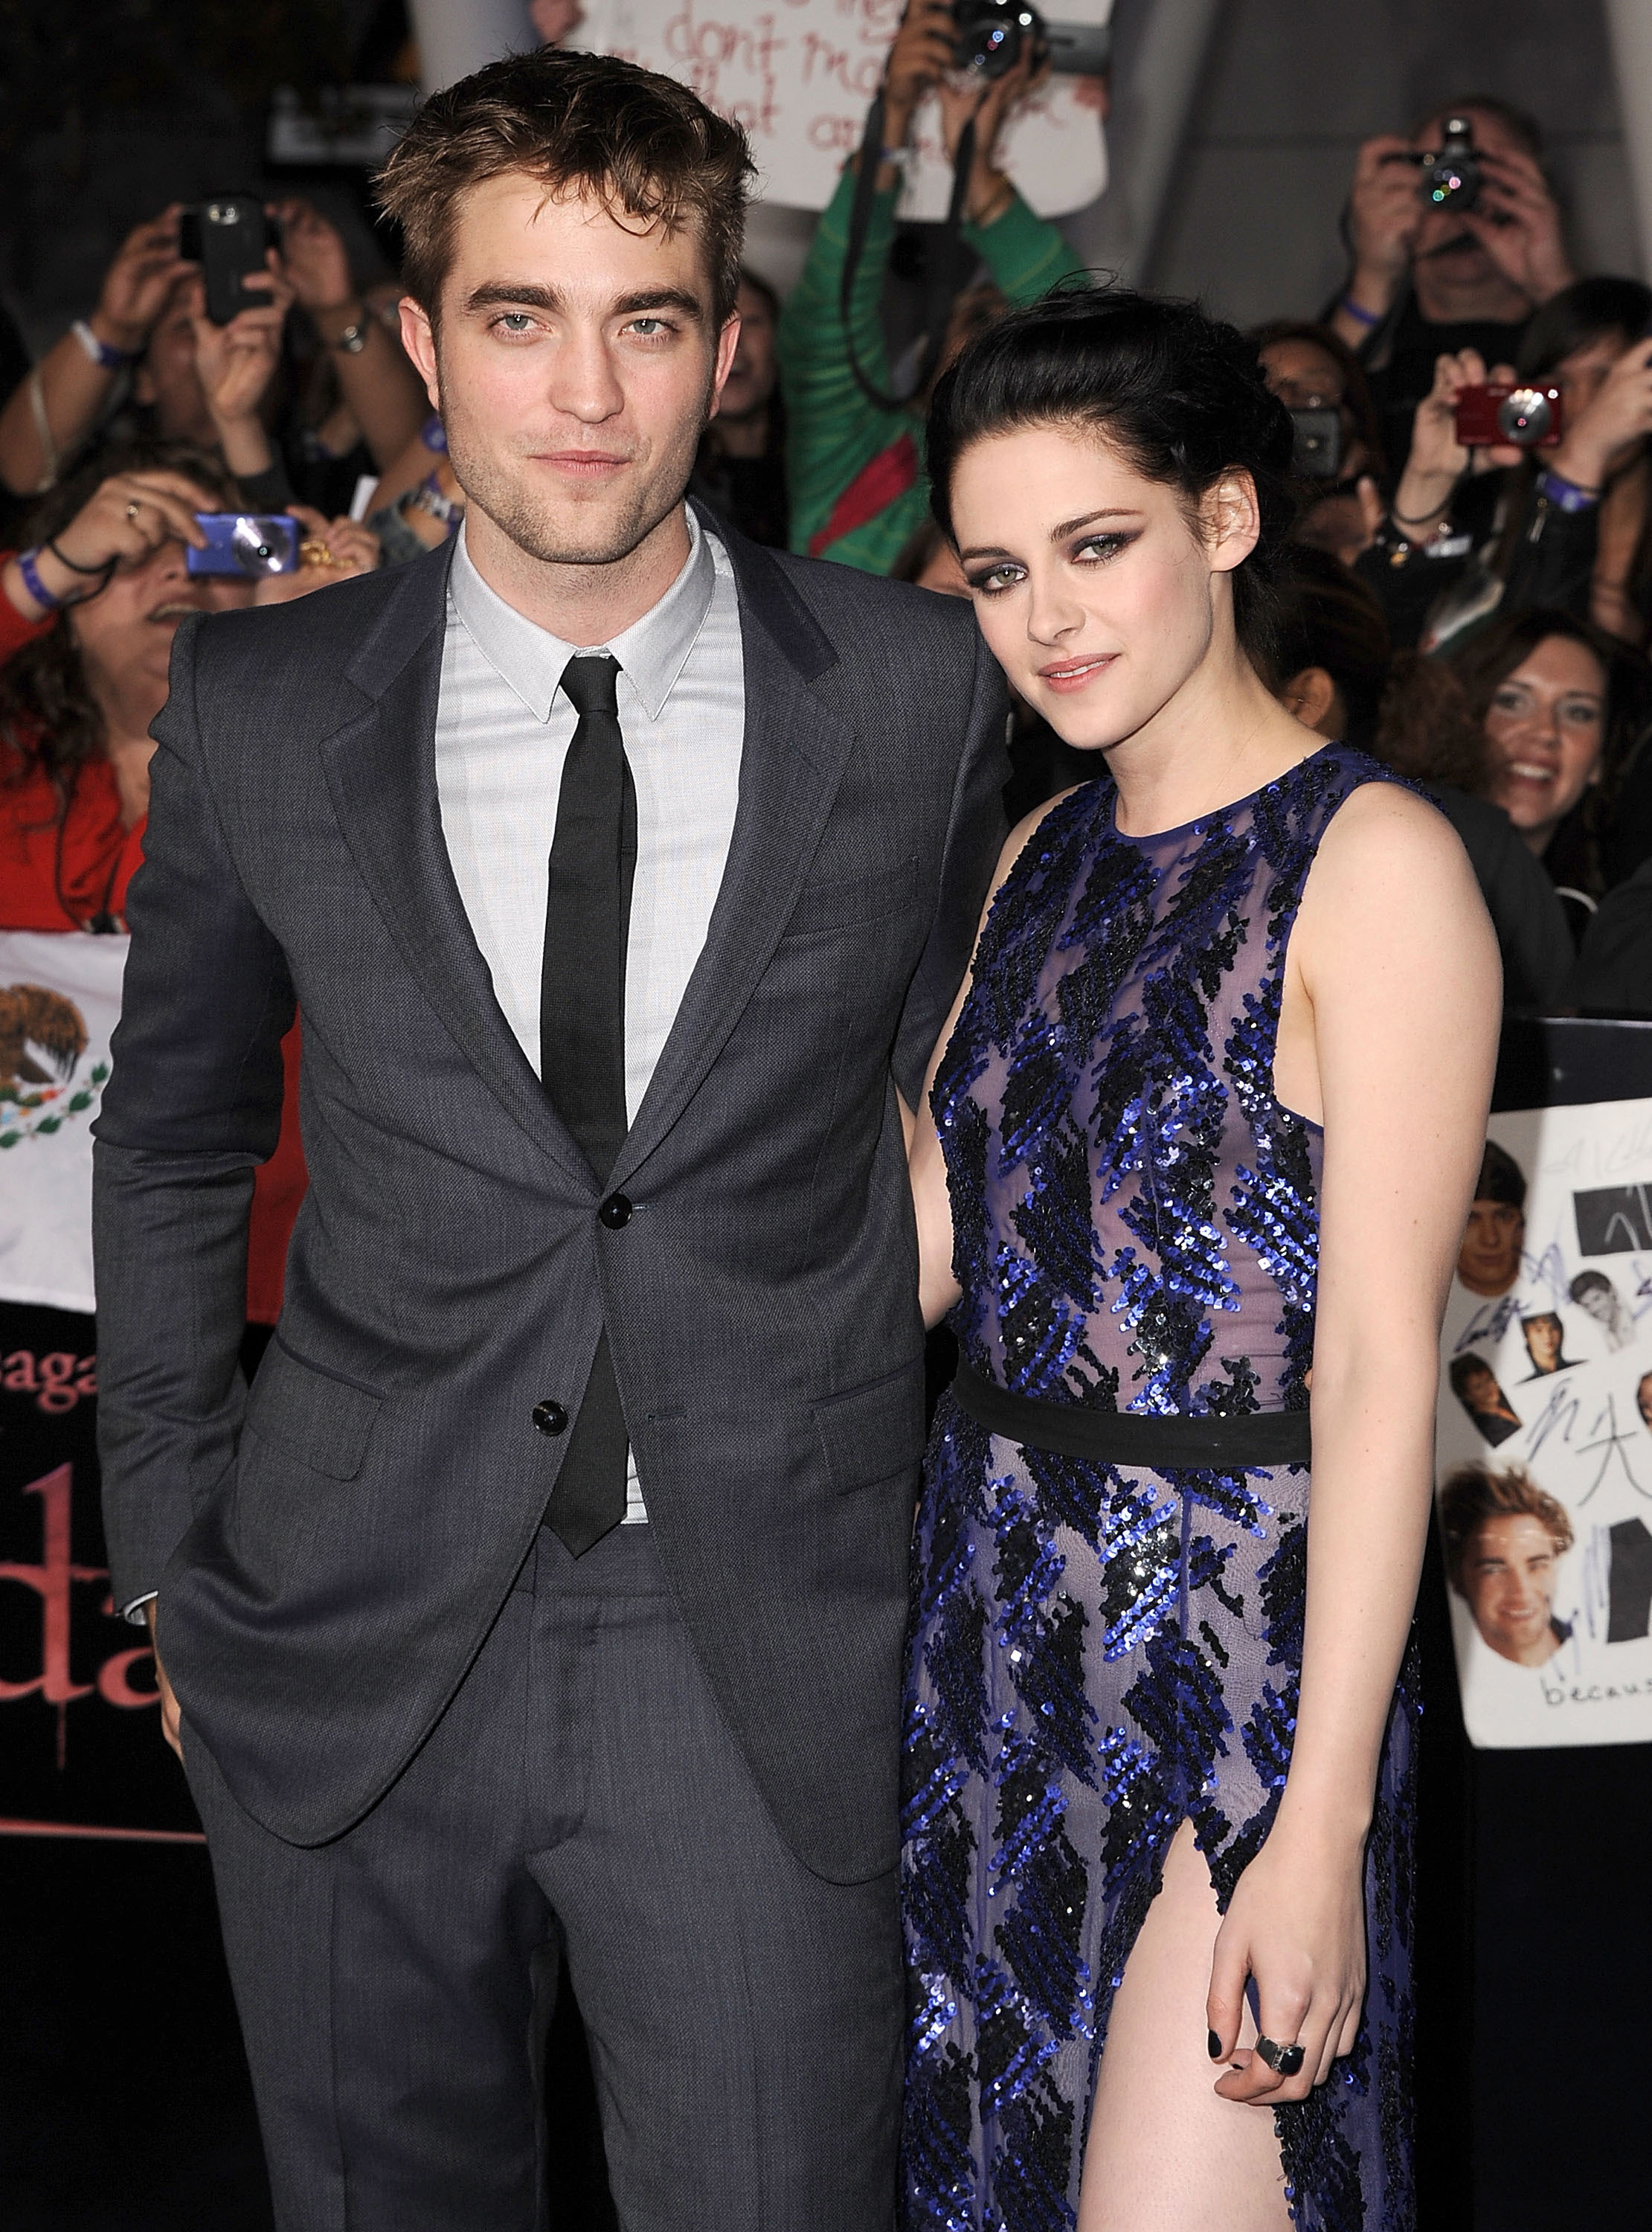 <p>When Kristen Stewart and <a href="https://www.wonderwall.com/celebrity/profiles/overview/robert-pattinson-386.article">Robert Pattinson</a> first got together, it seemed like a match made in "Twilight" heaven. But in 2012, K-Stew was photographed making out with her married "Snow White and the Huntsman" director, Rupert Sanders. The actress ditched her notoriously private ways and issued a public apology following the cheating scandal, saying, "I'm deeply sorry for the hurt and embarrassment I've caused to those close to me and everyone this has affected. This momentary indiscretion has jeopardized the most important thing in my life, the person I love and respect the most, Rob. I love him, I love him, I'm so sorry." After briefly working it out, the actors split for good in 2013.</p>